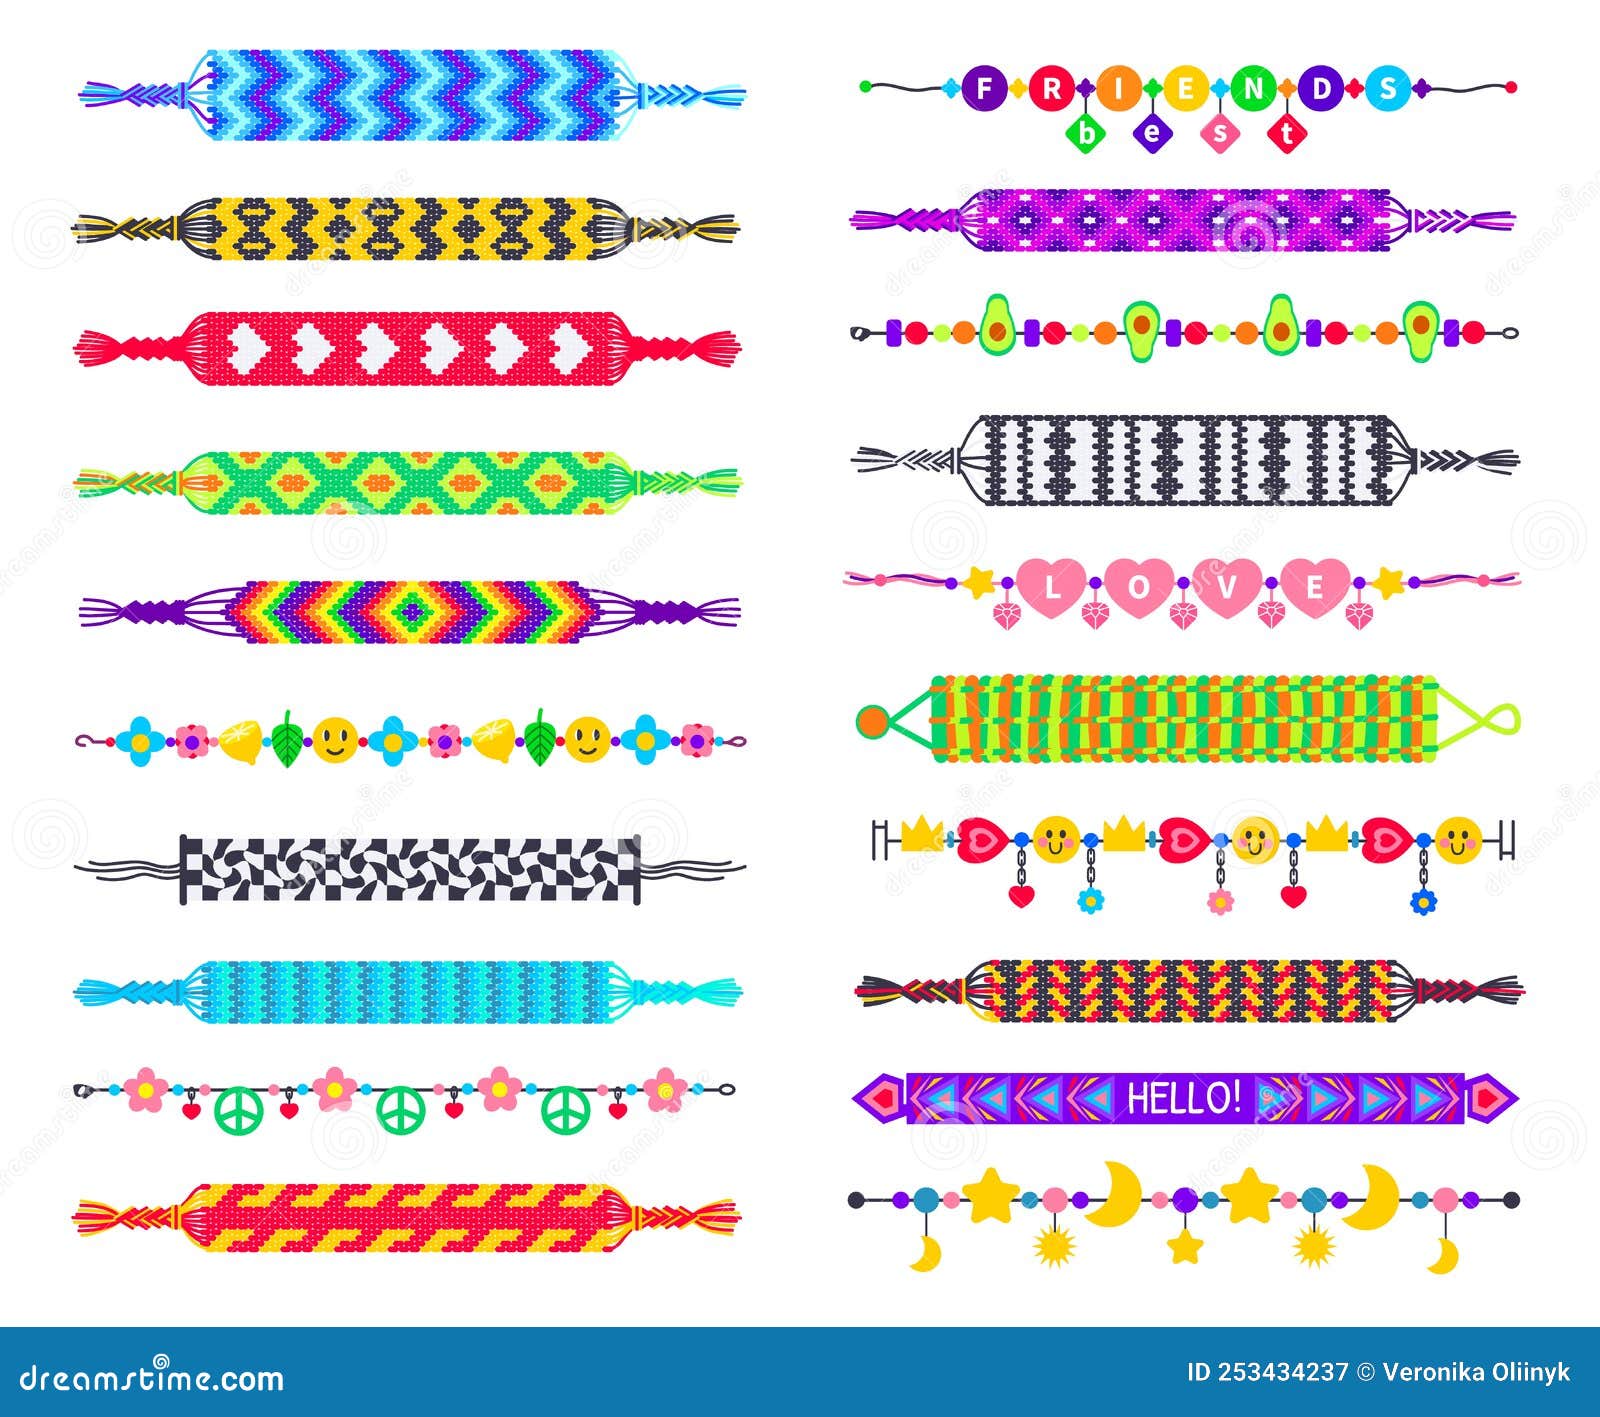 How To Make A Friendship Bracelet | The Bench